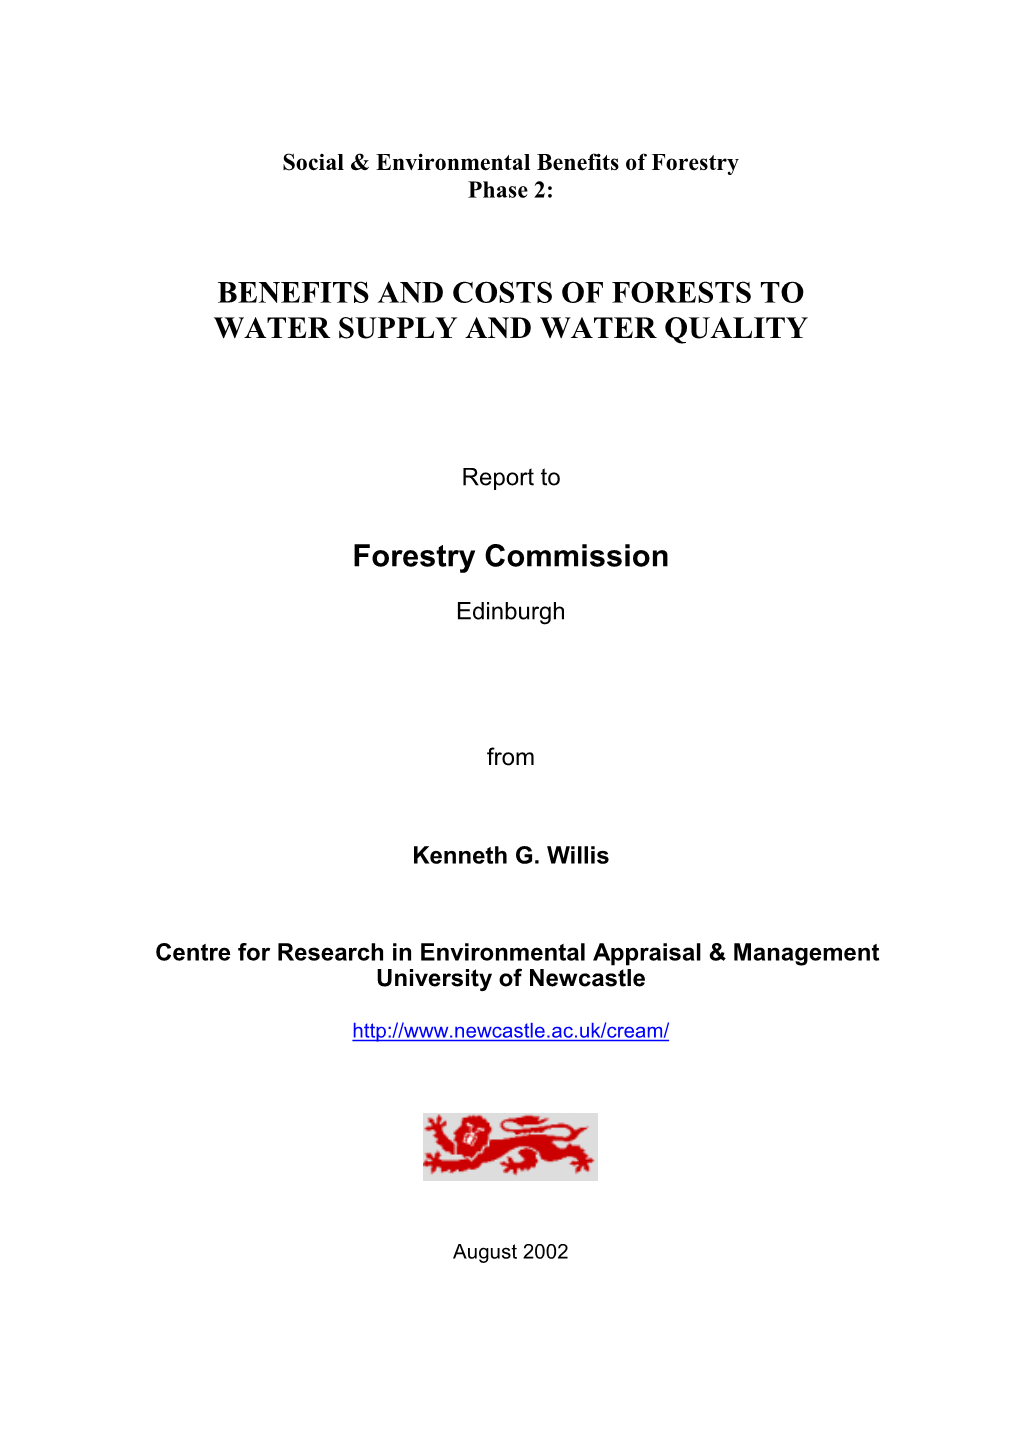 Benefits and Costs of Forests to Water Supply and Water Quality